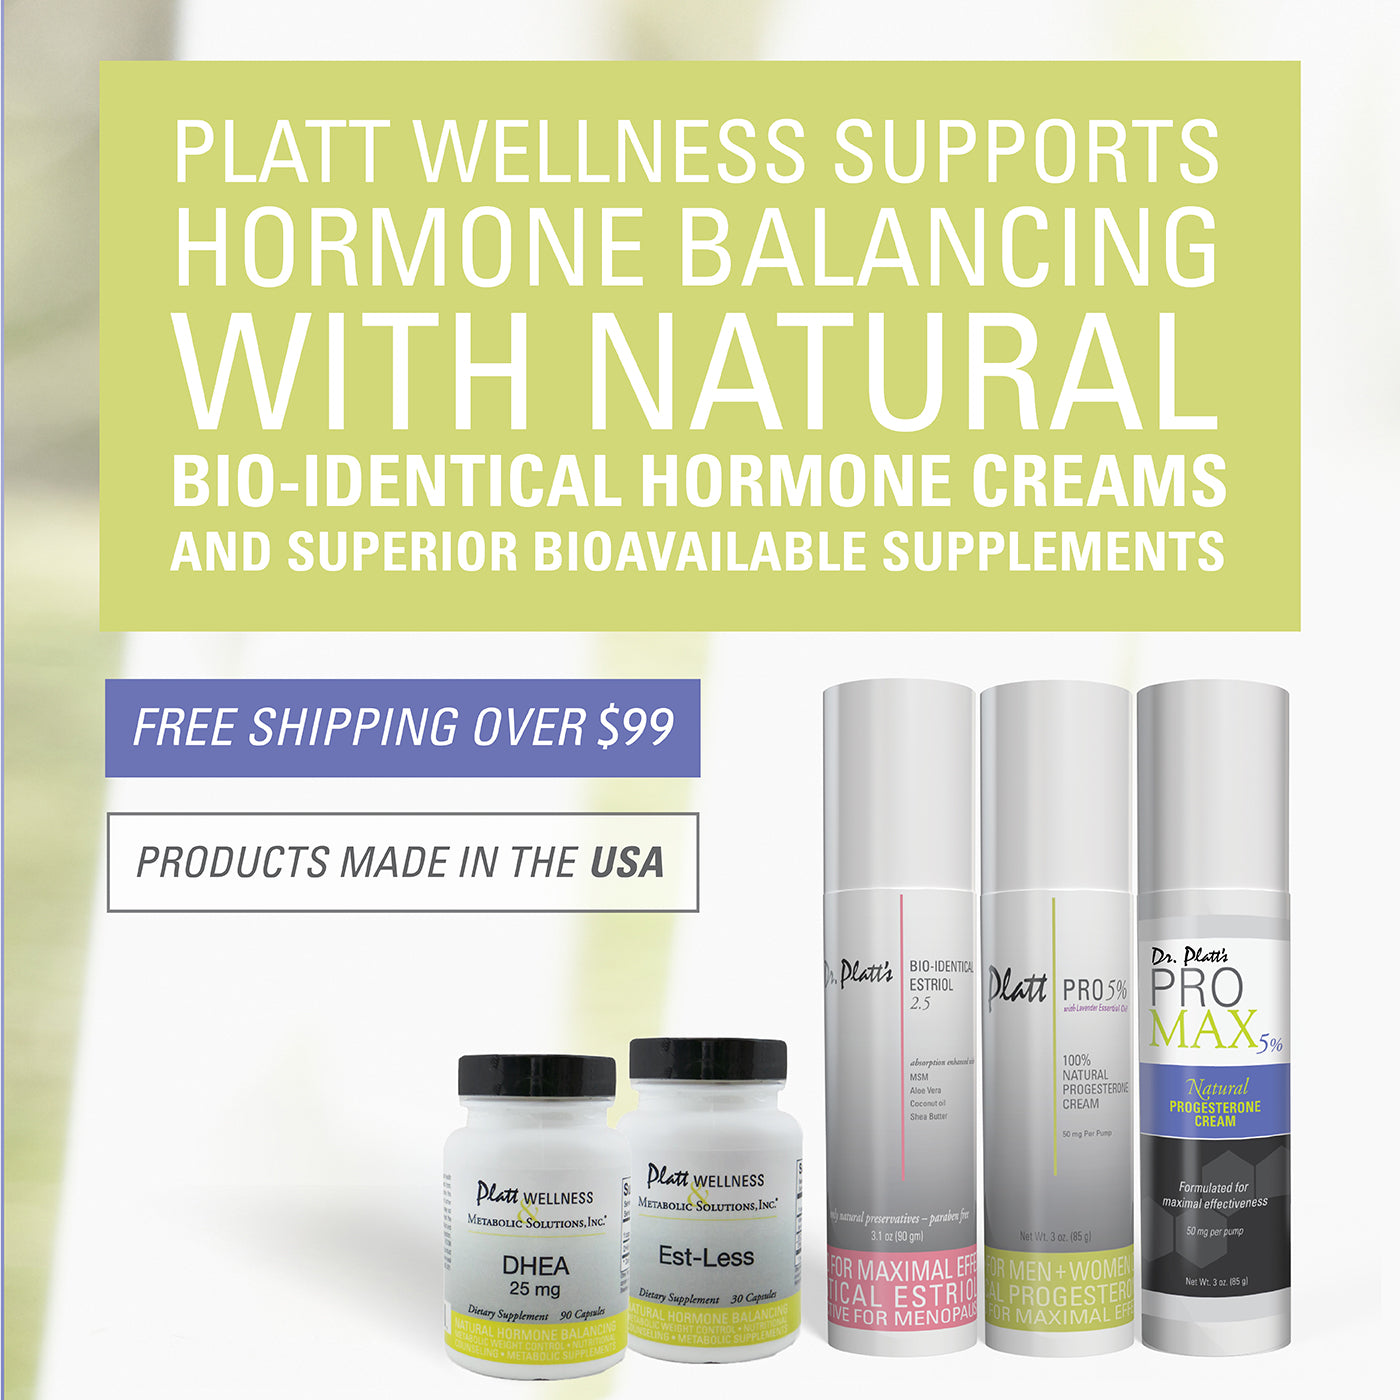 Natural bio-identical hormone creams and supplements for hormone replacement therapy